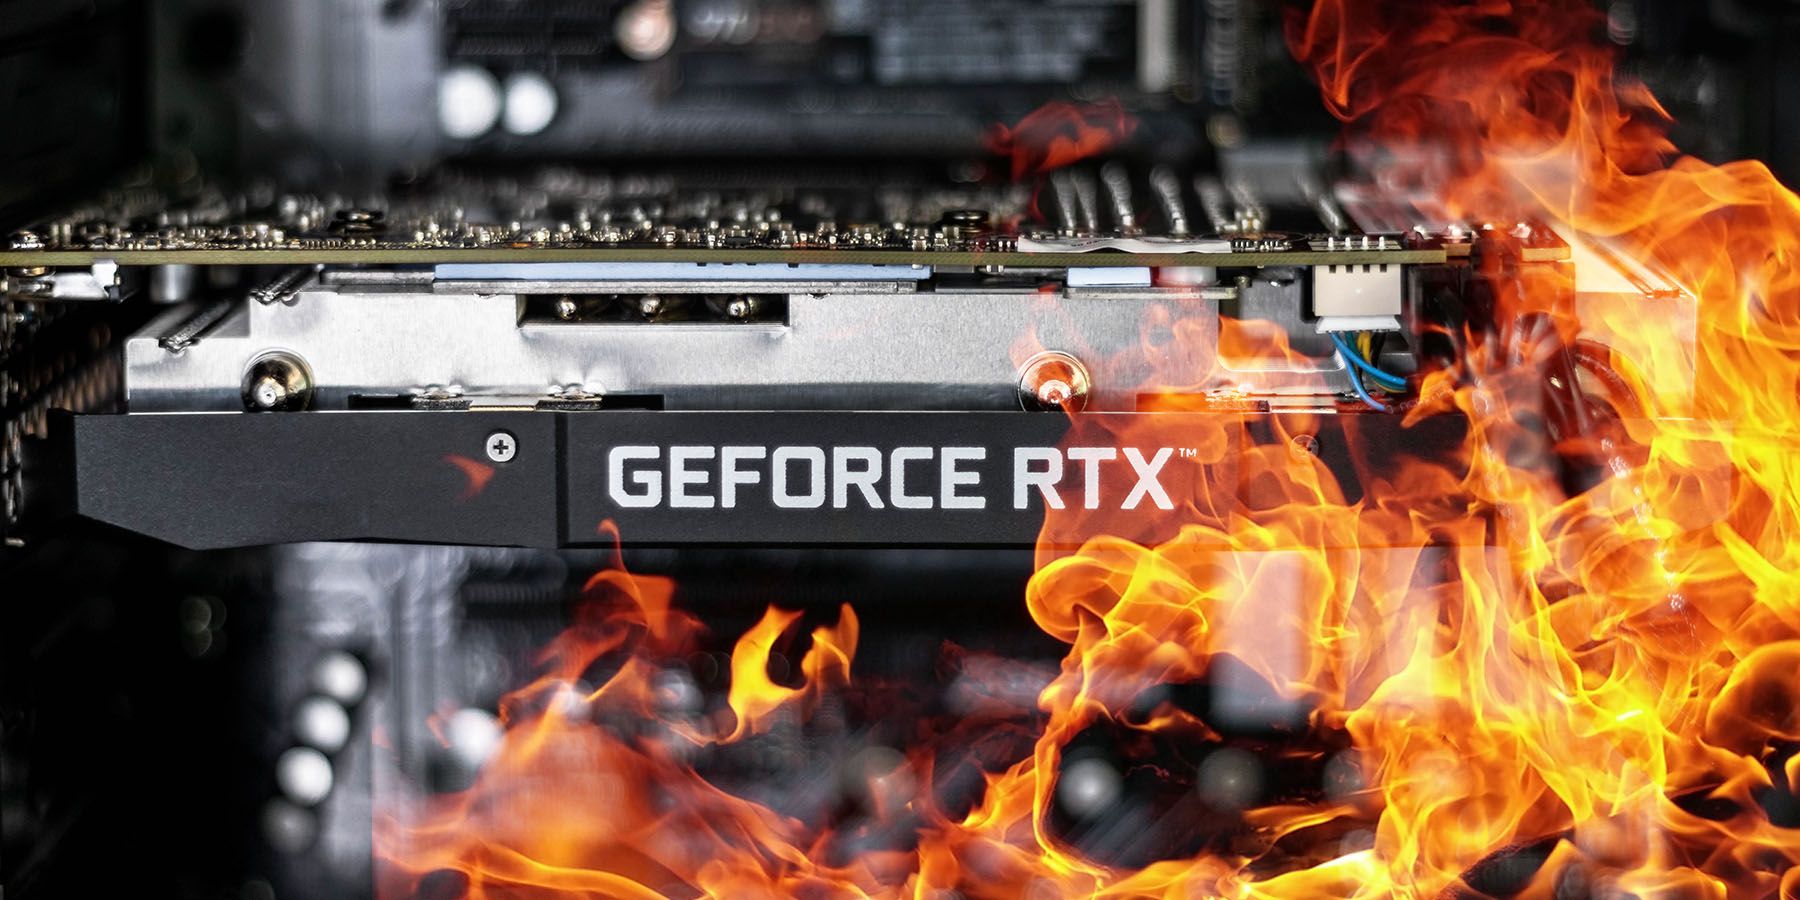 rtx-4090-burning-cables-fire